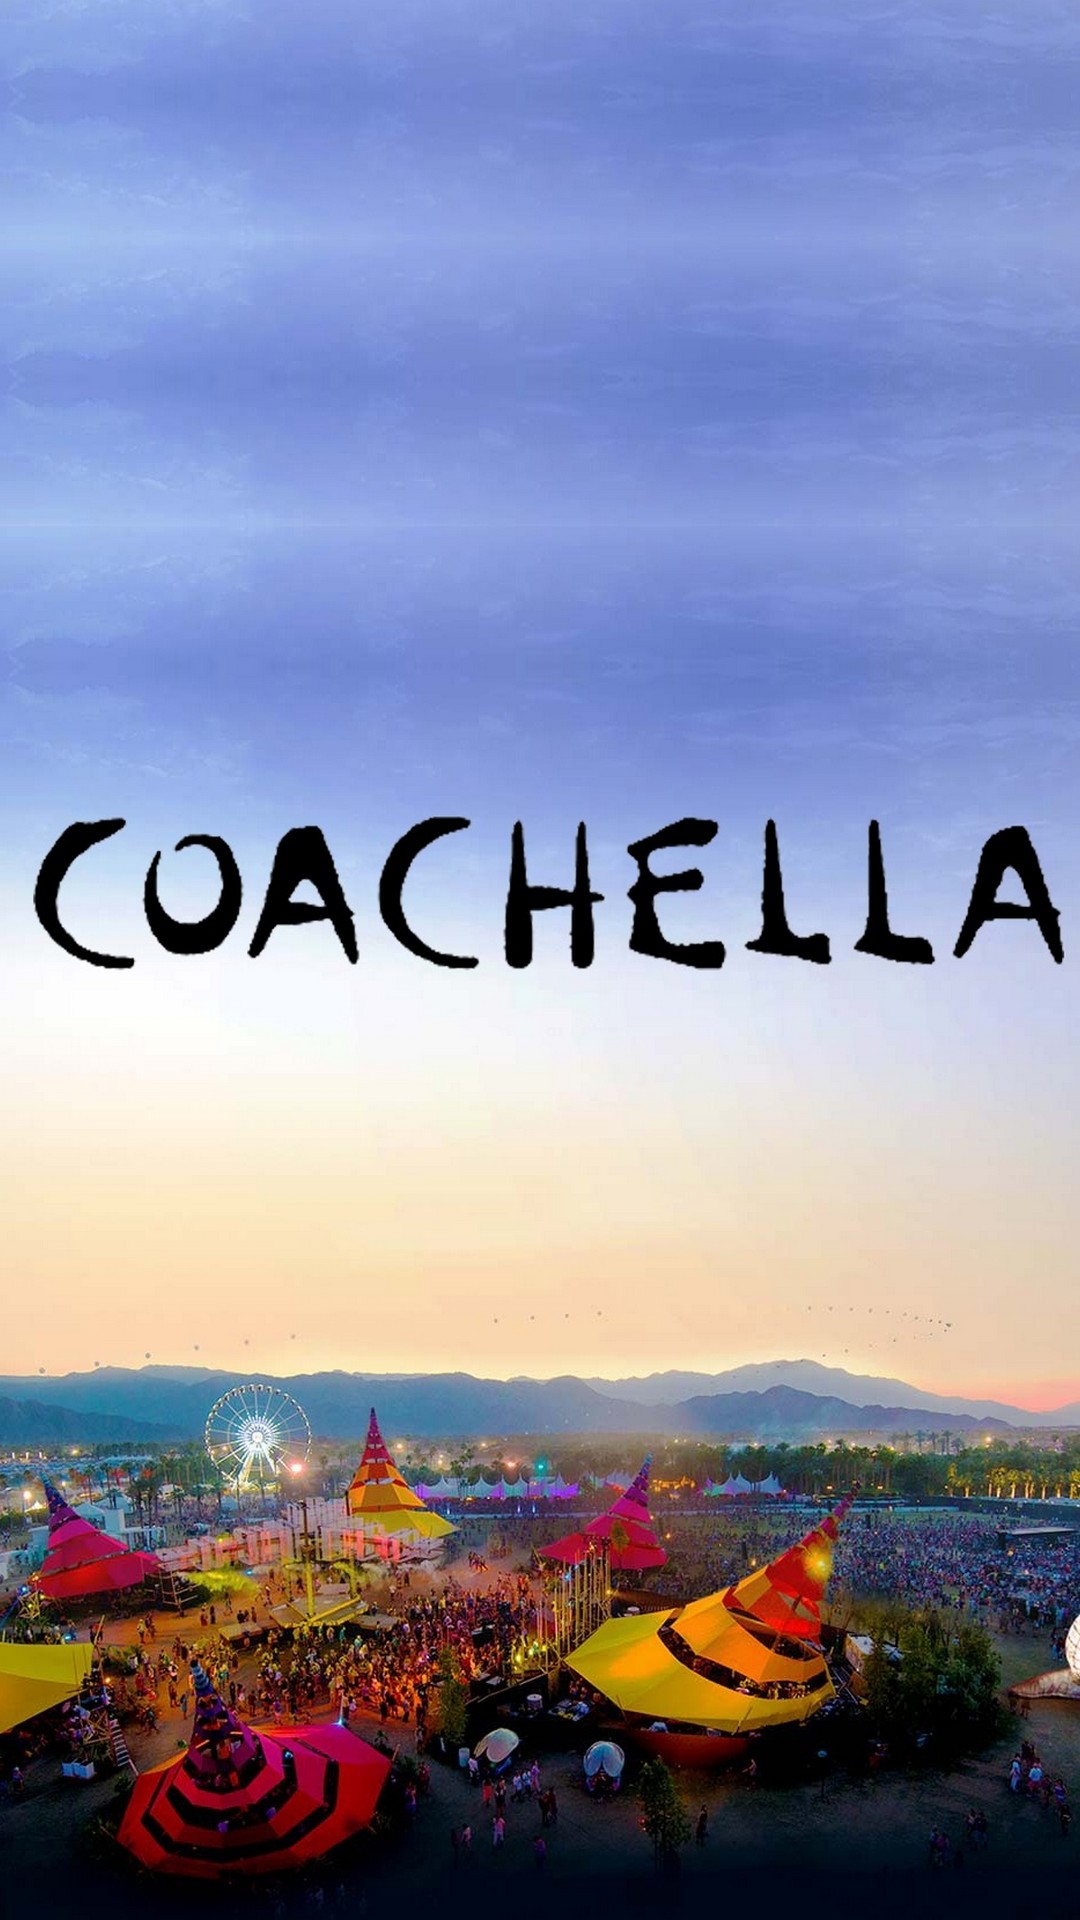 iPhone X Wallpaper Coachella 2019 With high-resolution 1080X1920 pixel. You can use this wallpaper for your iPhone 5, 6, 7, 8, X, XS, XR backgrounds, Mobile Screensaver, or iPad Lock Screen